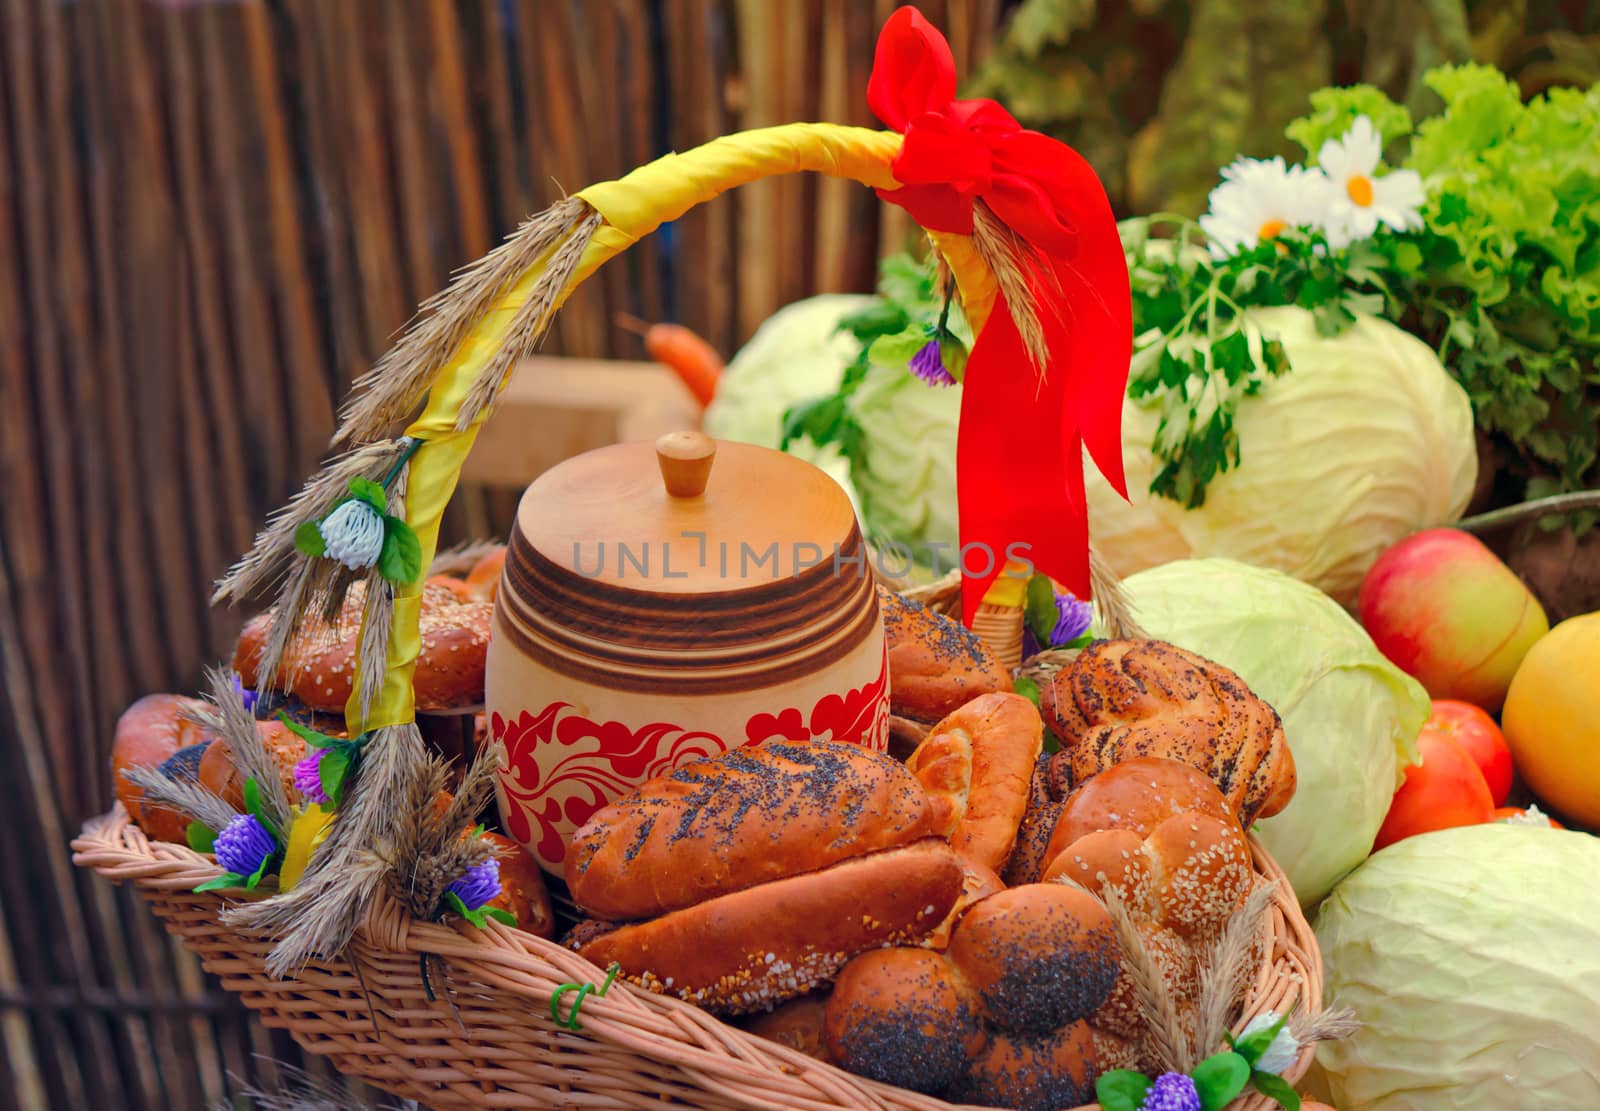 Basket of bread, decorated with ribbons, and vegetables by georgina198